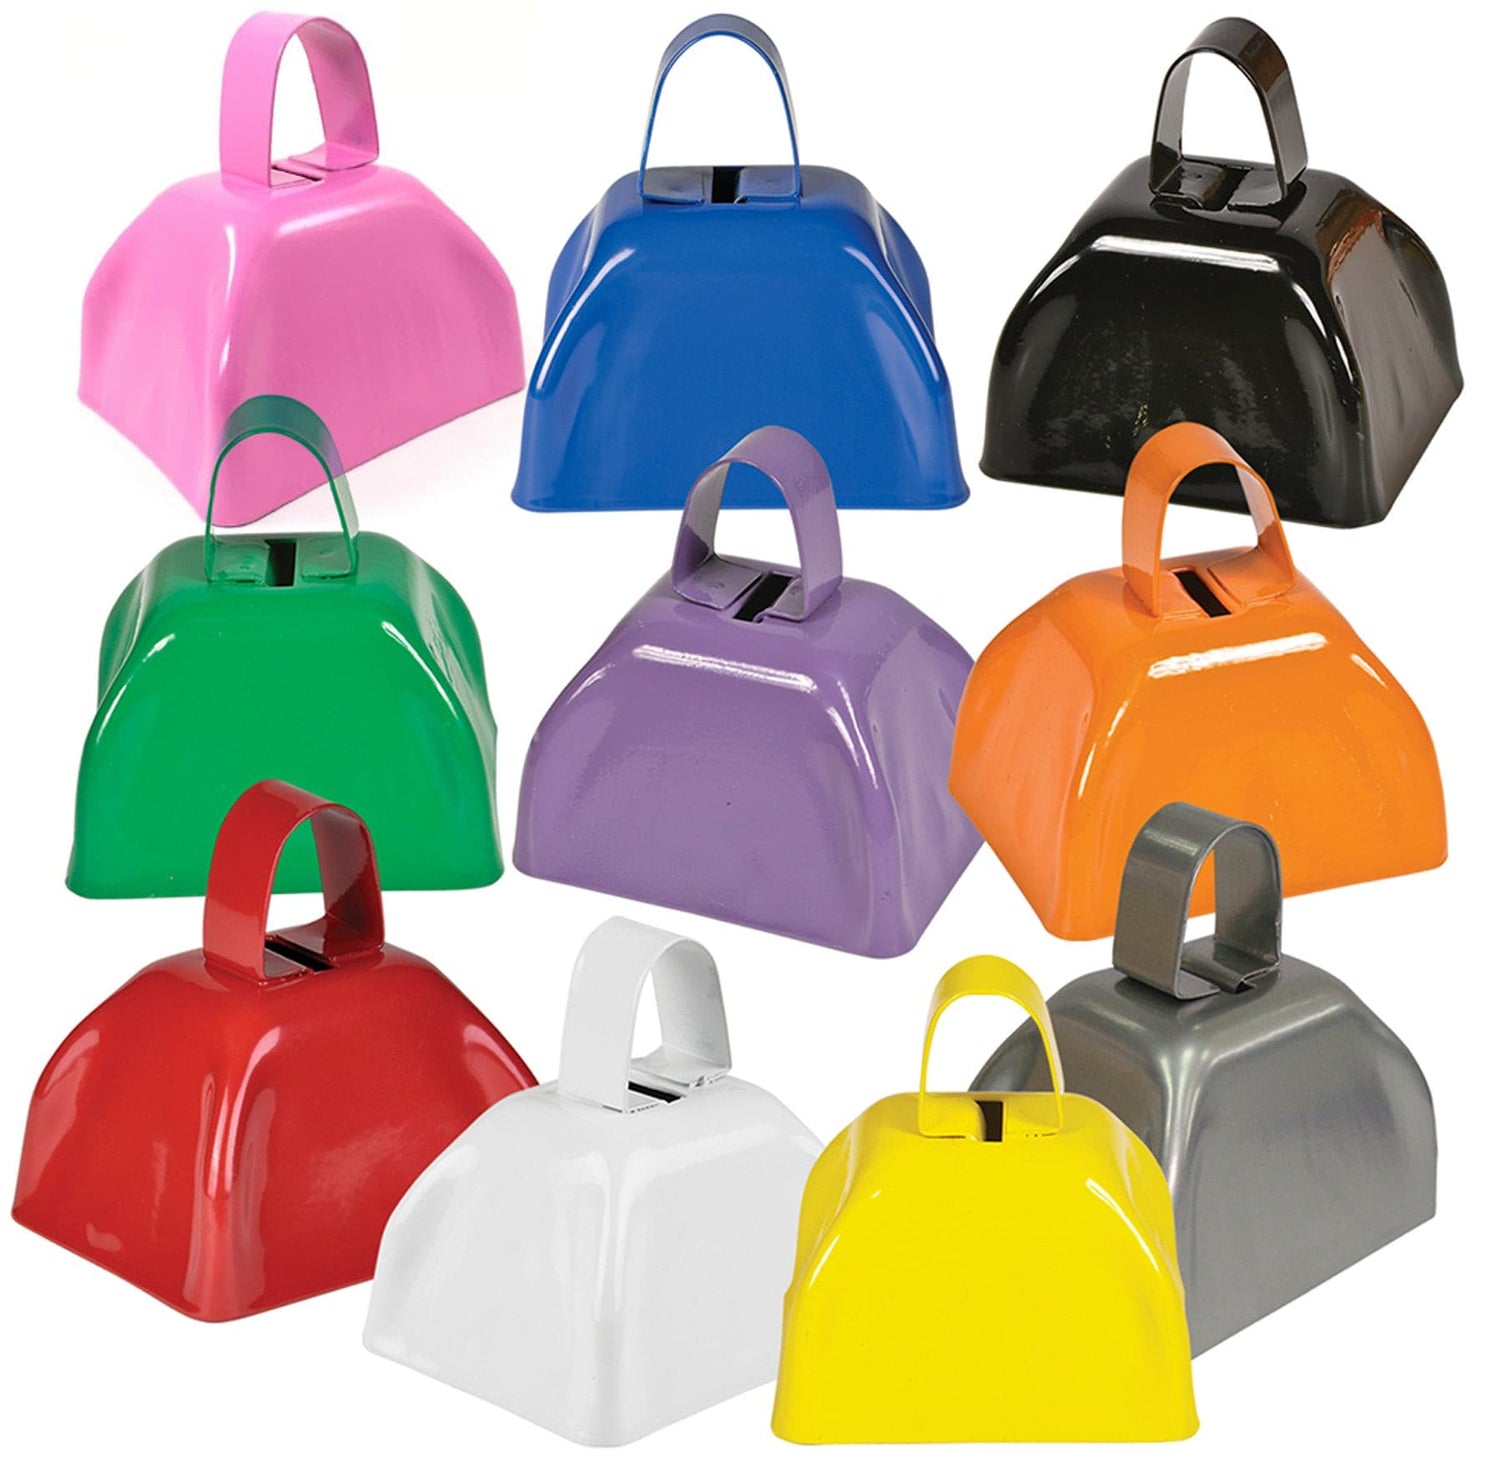 Bargain Bells! Case of Small Customizable Cowbells